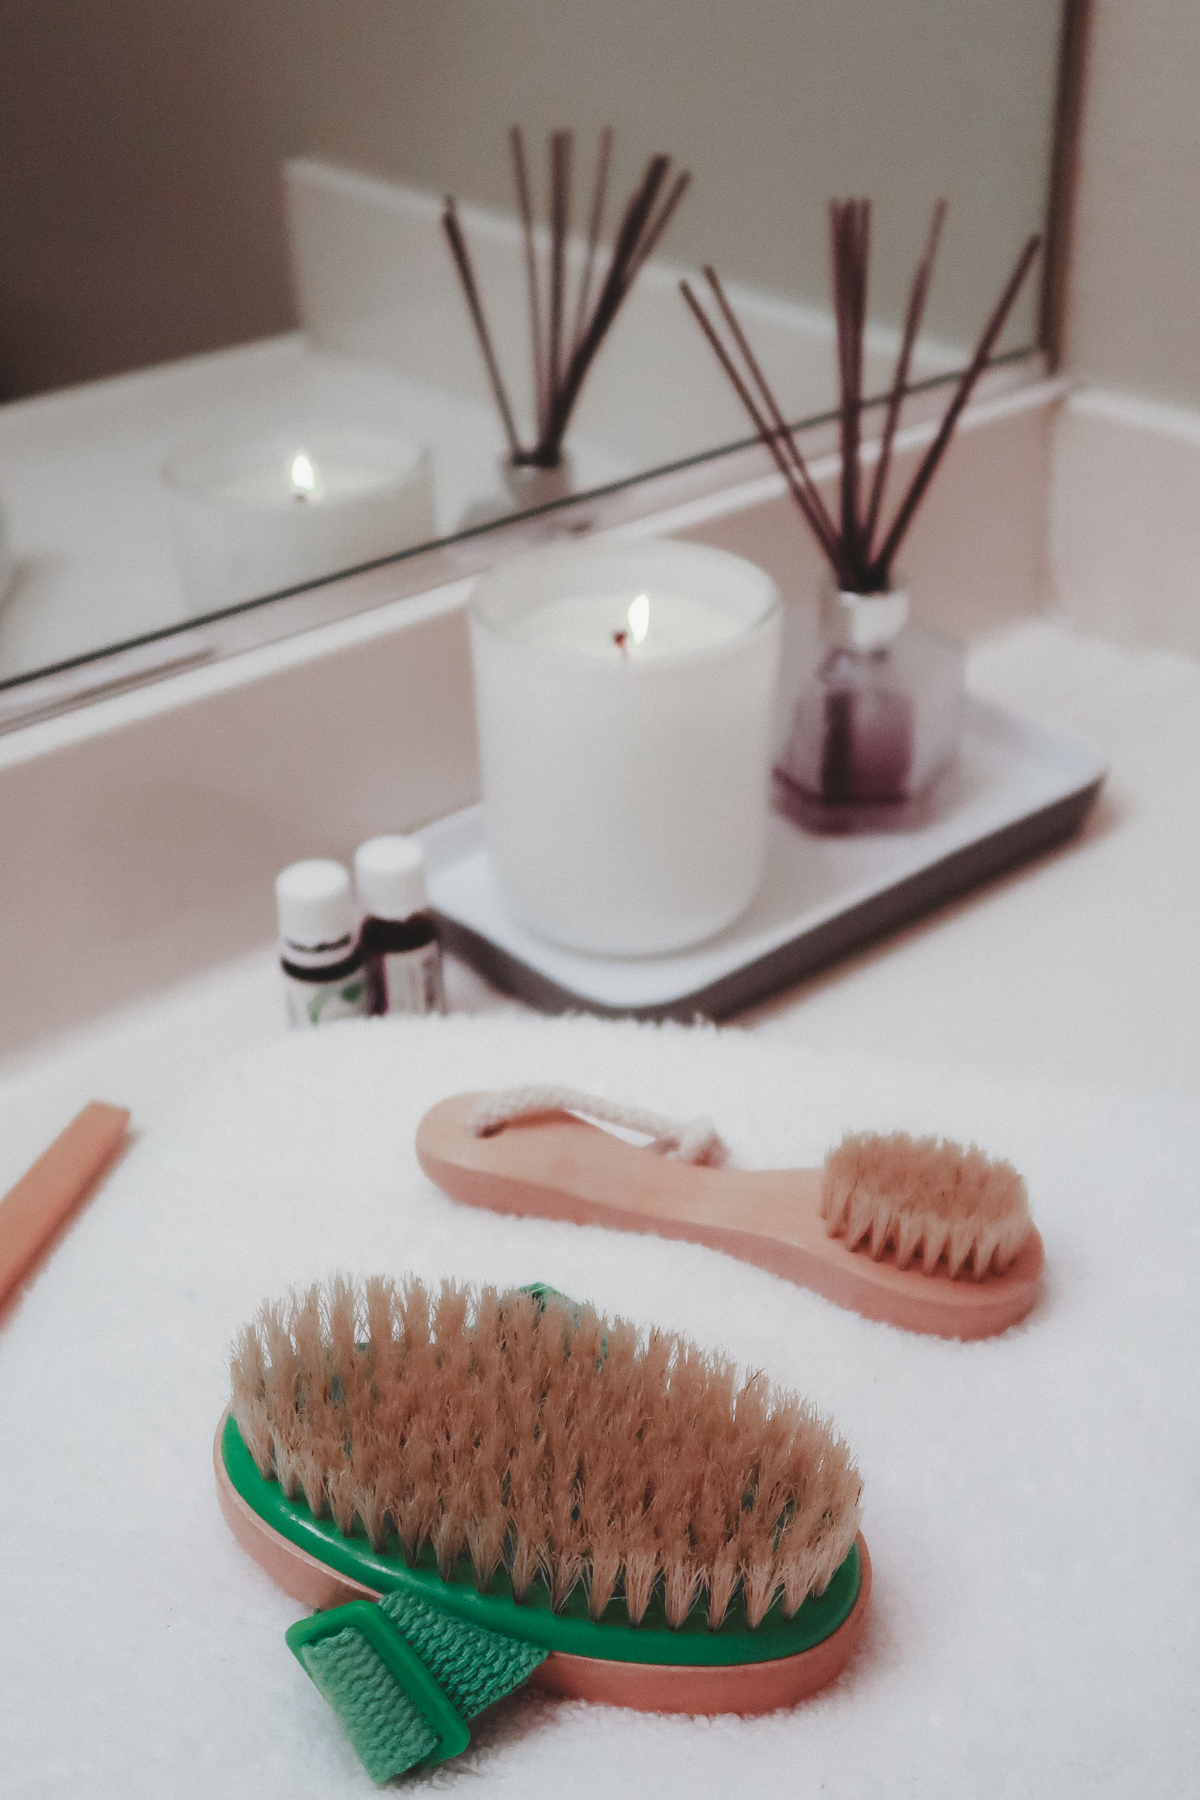 https://teacupsandtulips.com/wp-content/uploads/2018/11/how-to-clean-a-dry-body-brush-1.jpg